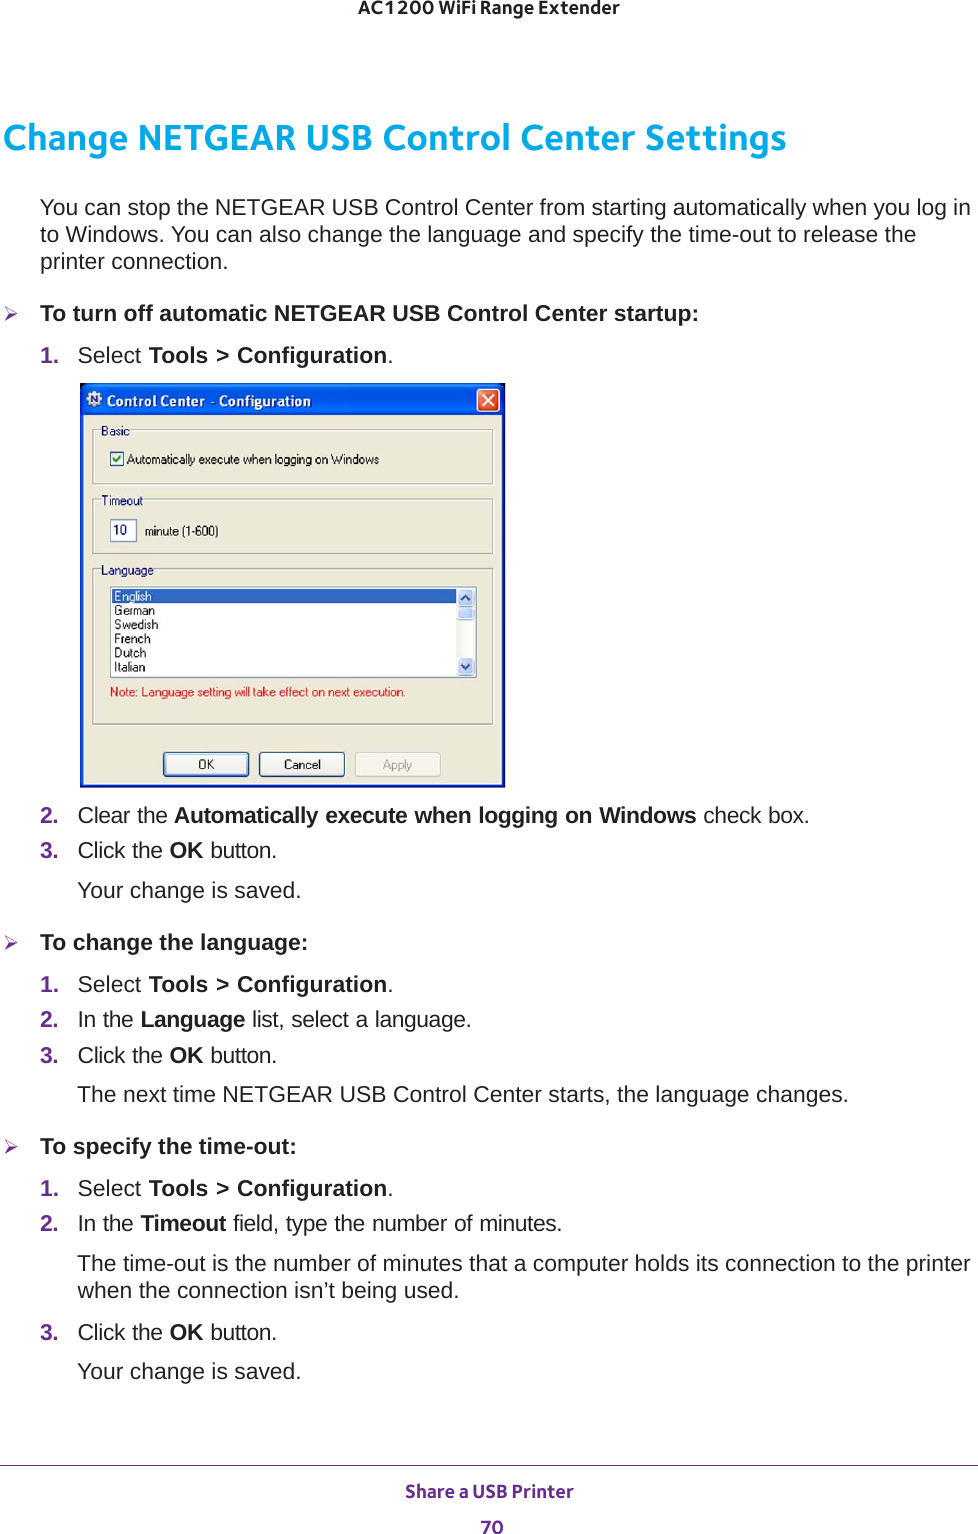 Share a USB Printer 70AC1200 WiFi Range Extender Change NETGEAR USB Control Center SettingsYou can stop the NETGEAR USB Control Center from starting automatically when you log in to Windows. You can also change the language and specify the time-out to release the printer connection.To turn off automatic NETGEAR USB Control Center startup:1.  Select Tools &gt; Configuration.2.  Clear the Automatically execute when logging on Windows check box.3.  Click the OK button.Your change is saved.To change the language:1.  Select Tools &gt; Configuration.2.  In the Language list, select a language.3.  Click the OK button.The next time NETGEAR USB Control Center starts, the language changes.To specify the time-out:1.  Select Tools &gt; Configuration.2.  In the Timeout field, type the number of minutes.The time-out is the number of minutes that a computer holds its connection to the printer when the connection isn’t being used.3.  Click the OK button.Your change is saved.